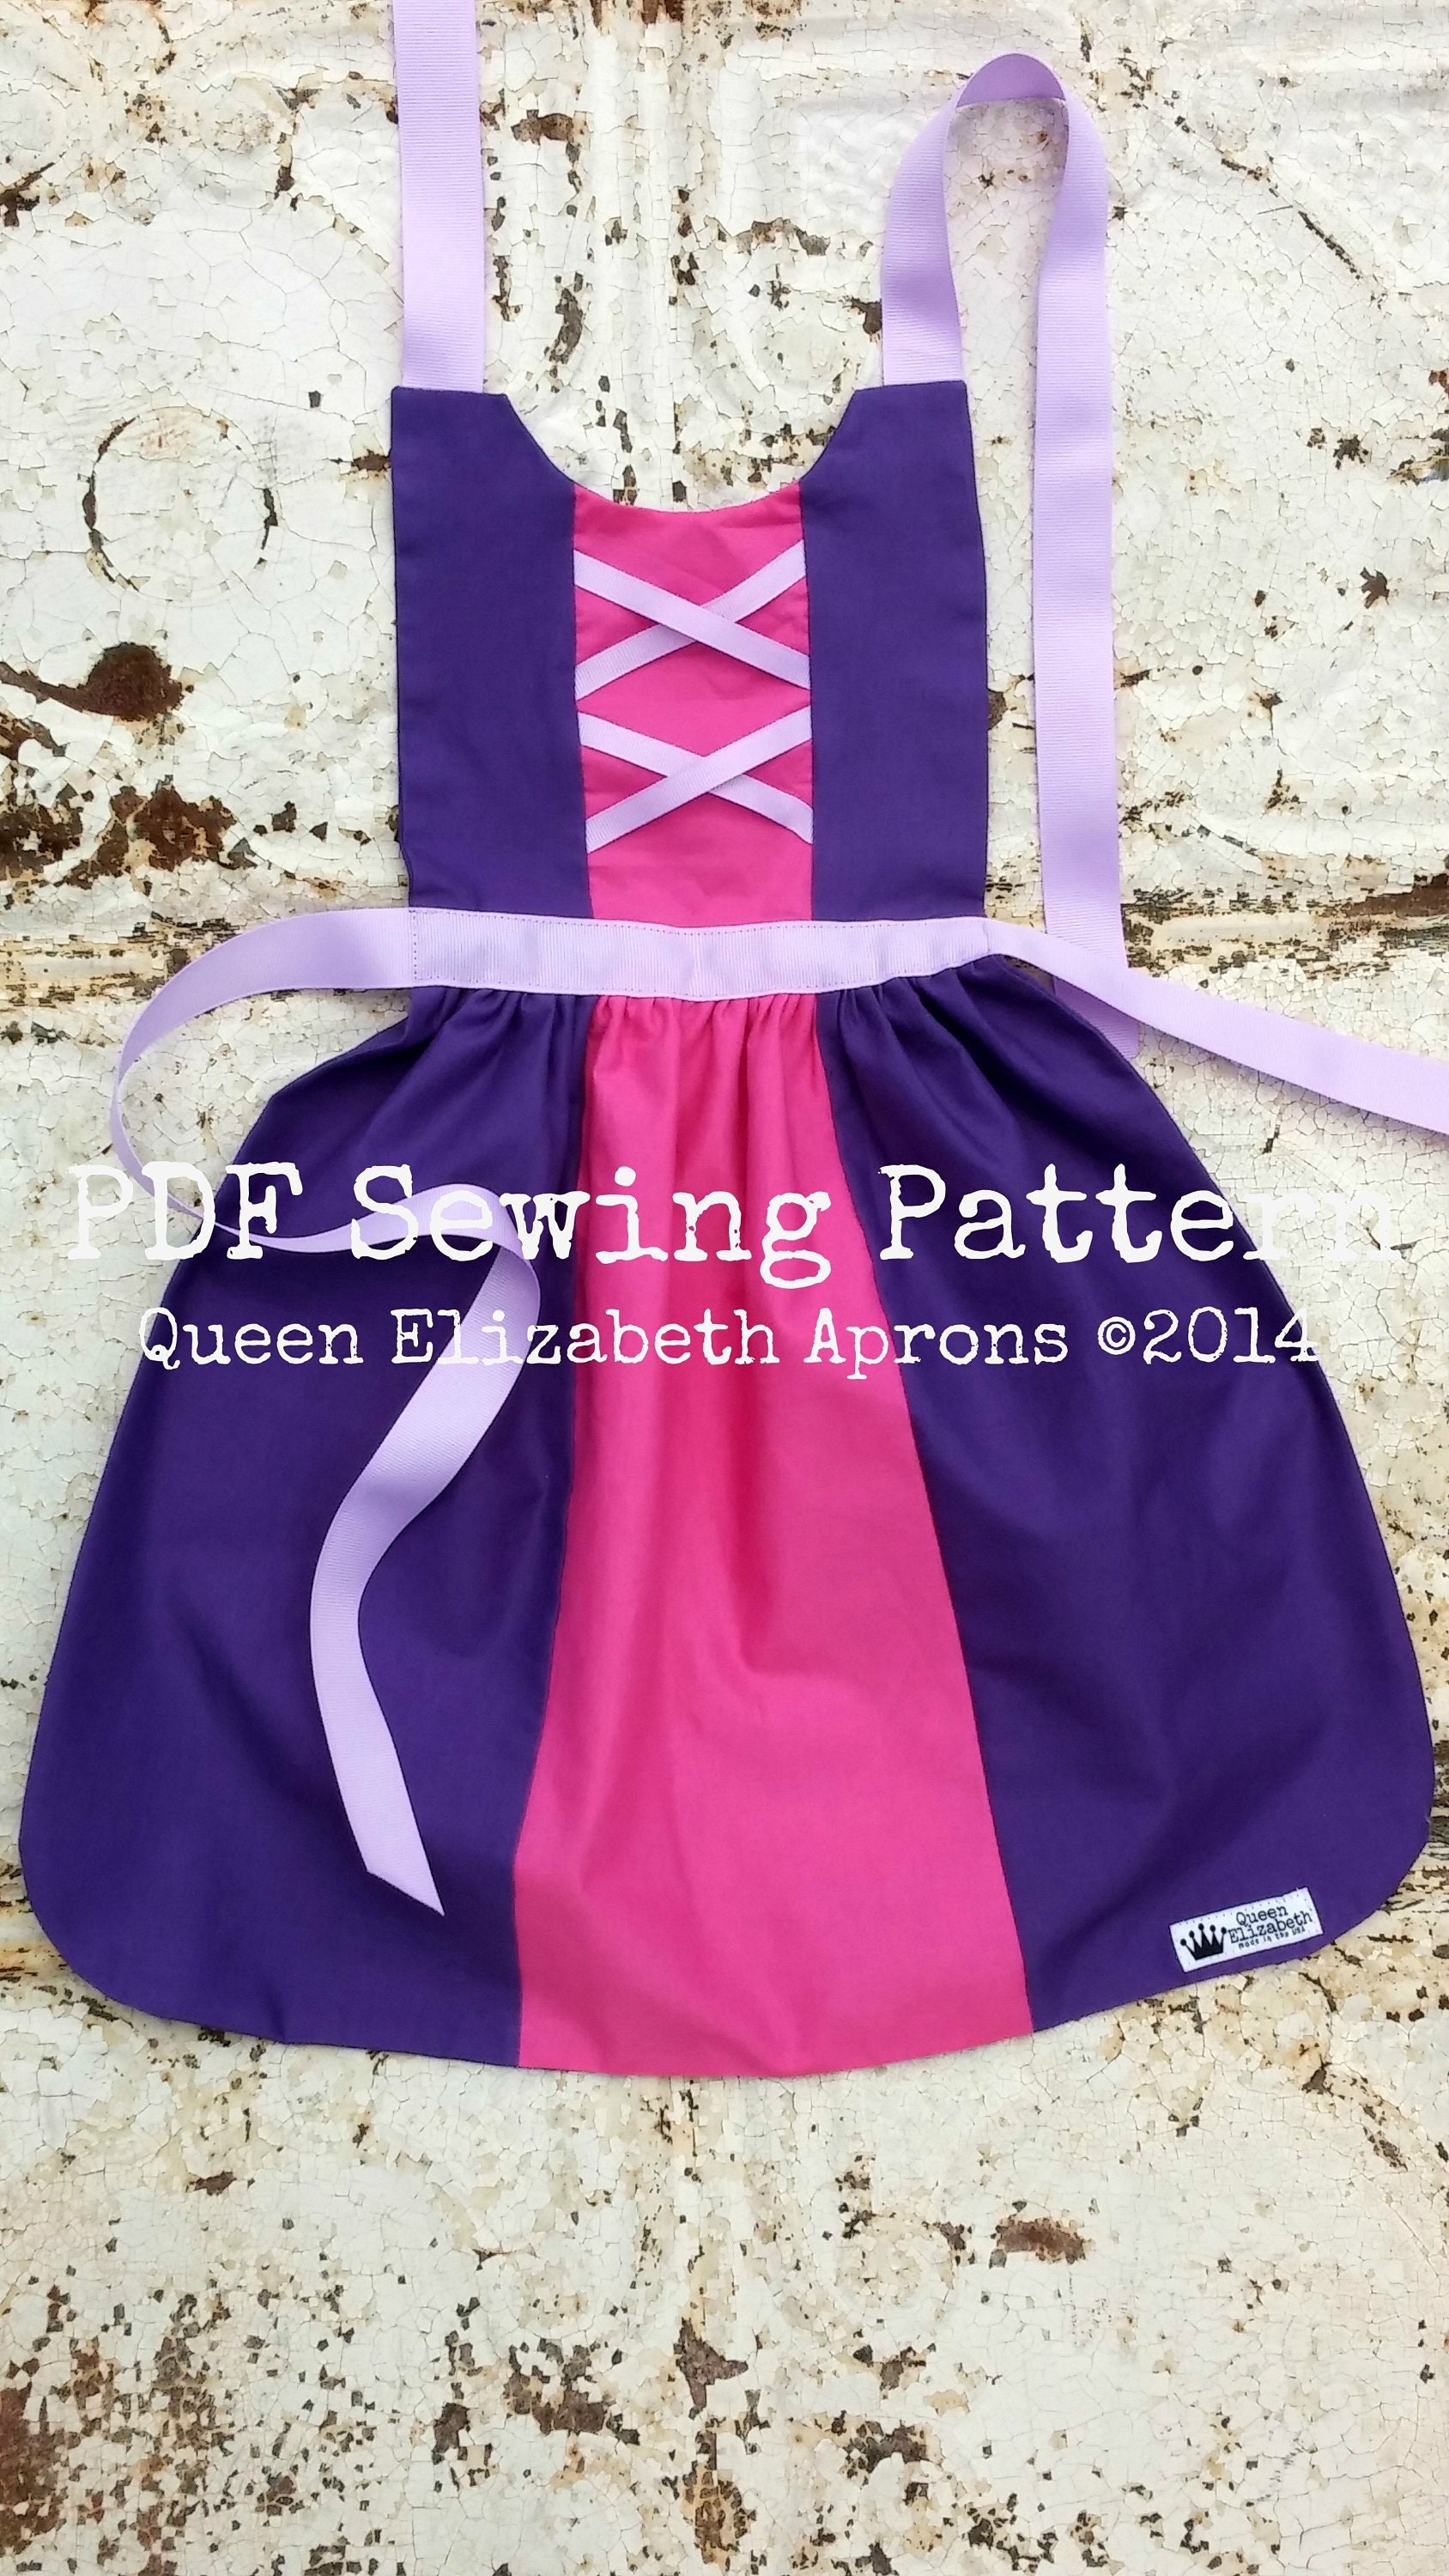 Harry Potter Witch Wizard Magic School House Dress up Costume Apron Pdf  Sewing PATTERN. Girls 9-12 Teens/ Women 0-12. Birthday Party Cosplay 